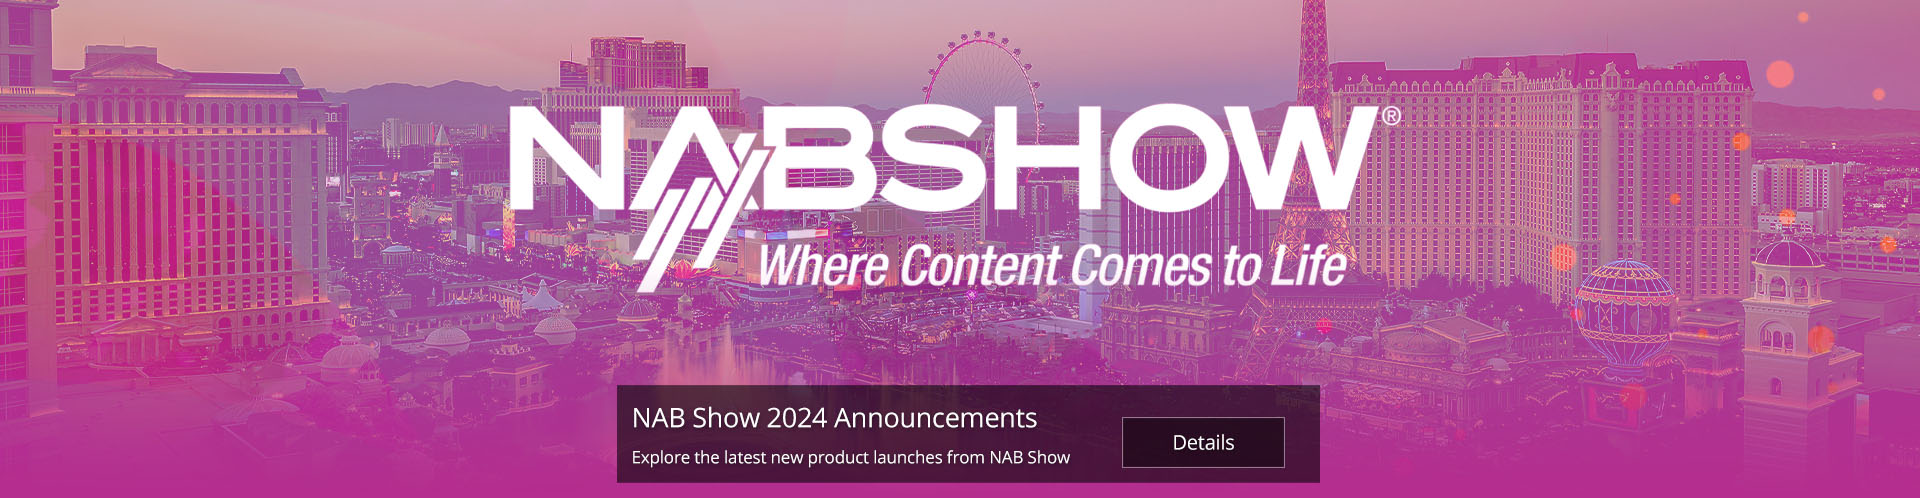 New Product Announcements from NAB 2024